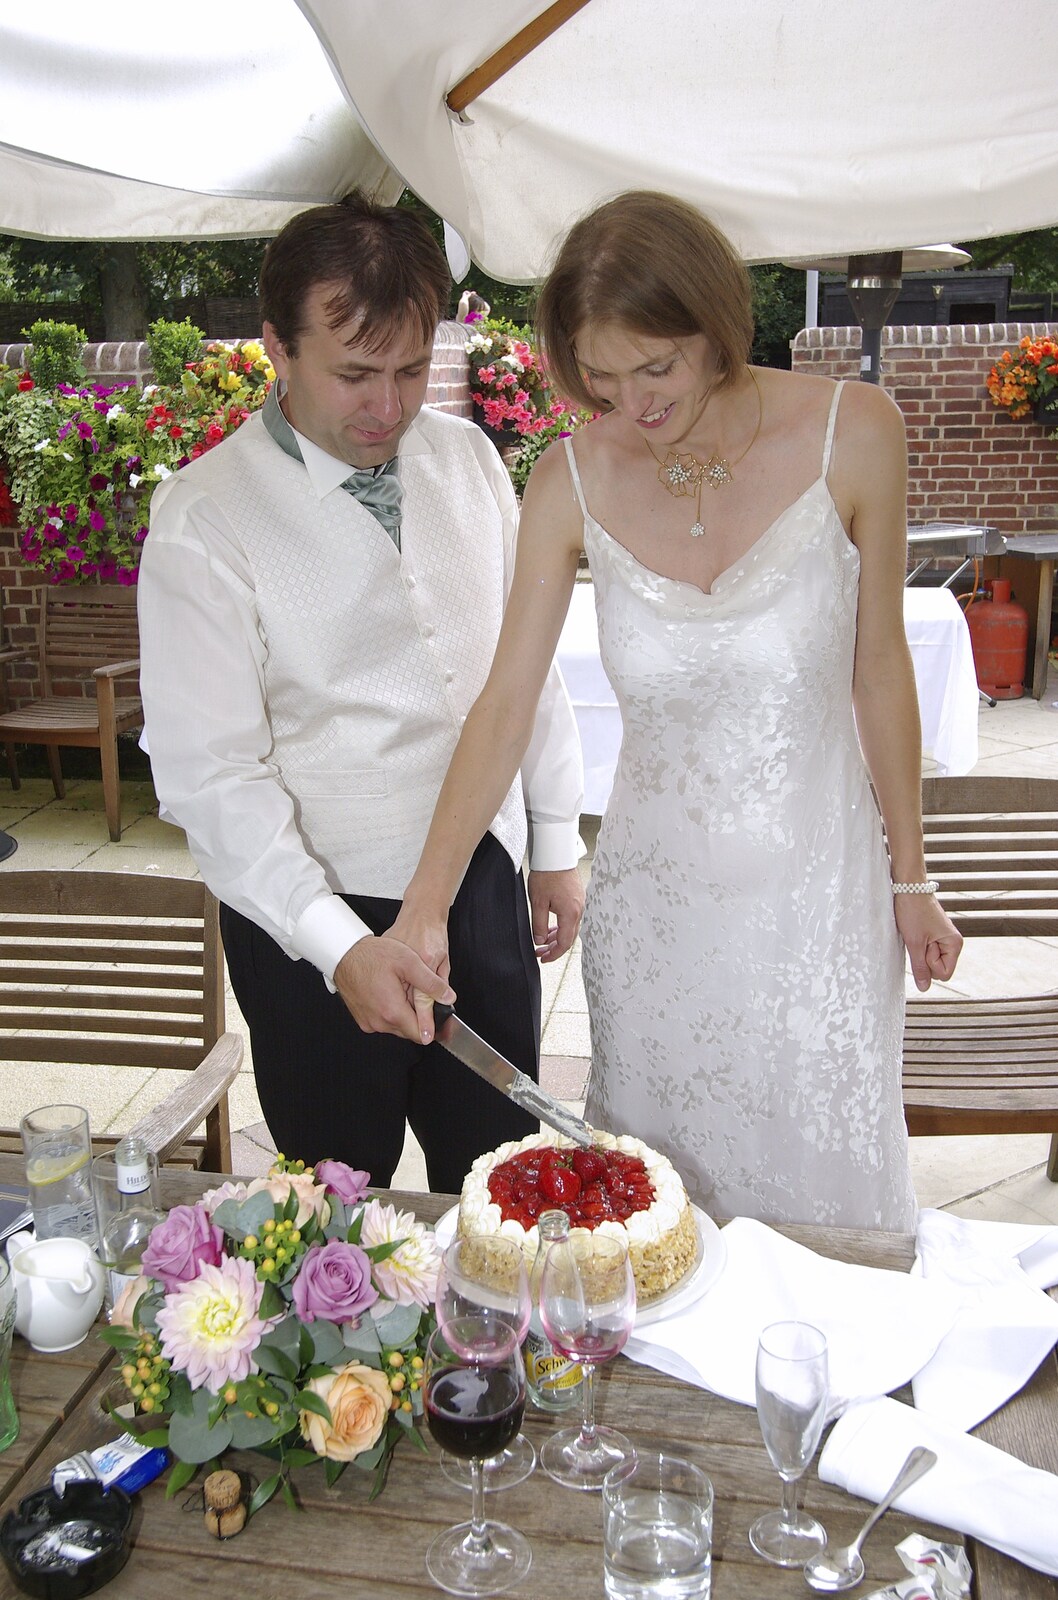 Liviu and Christina's Wedding Day, Babraham, Cambridge - 11th August 2007: It's the cutting-the-cake moment